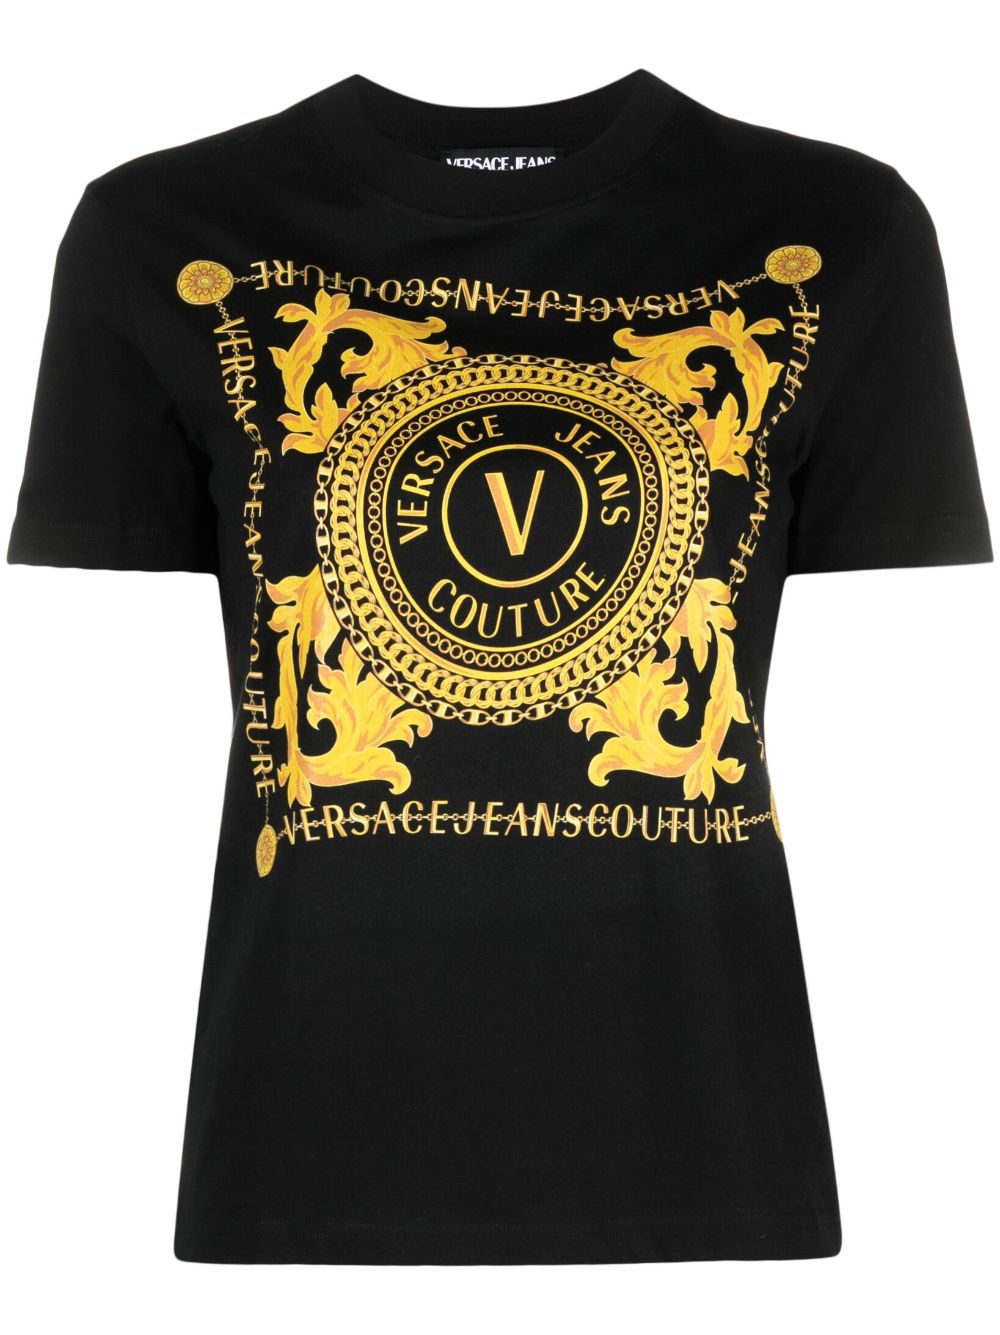 Versace Jeans Couture Logo Couture print T-shirt - Black von Versace Jeans Couture